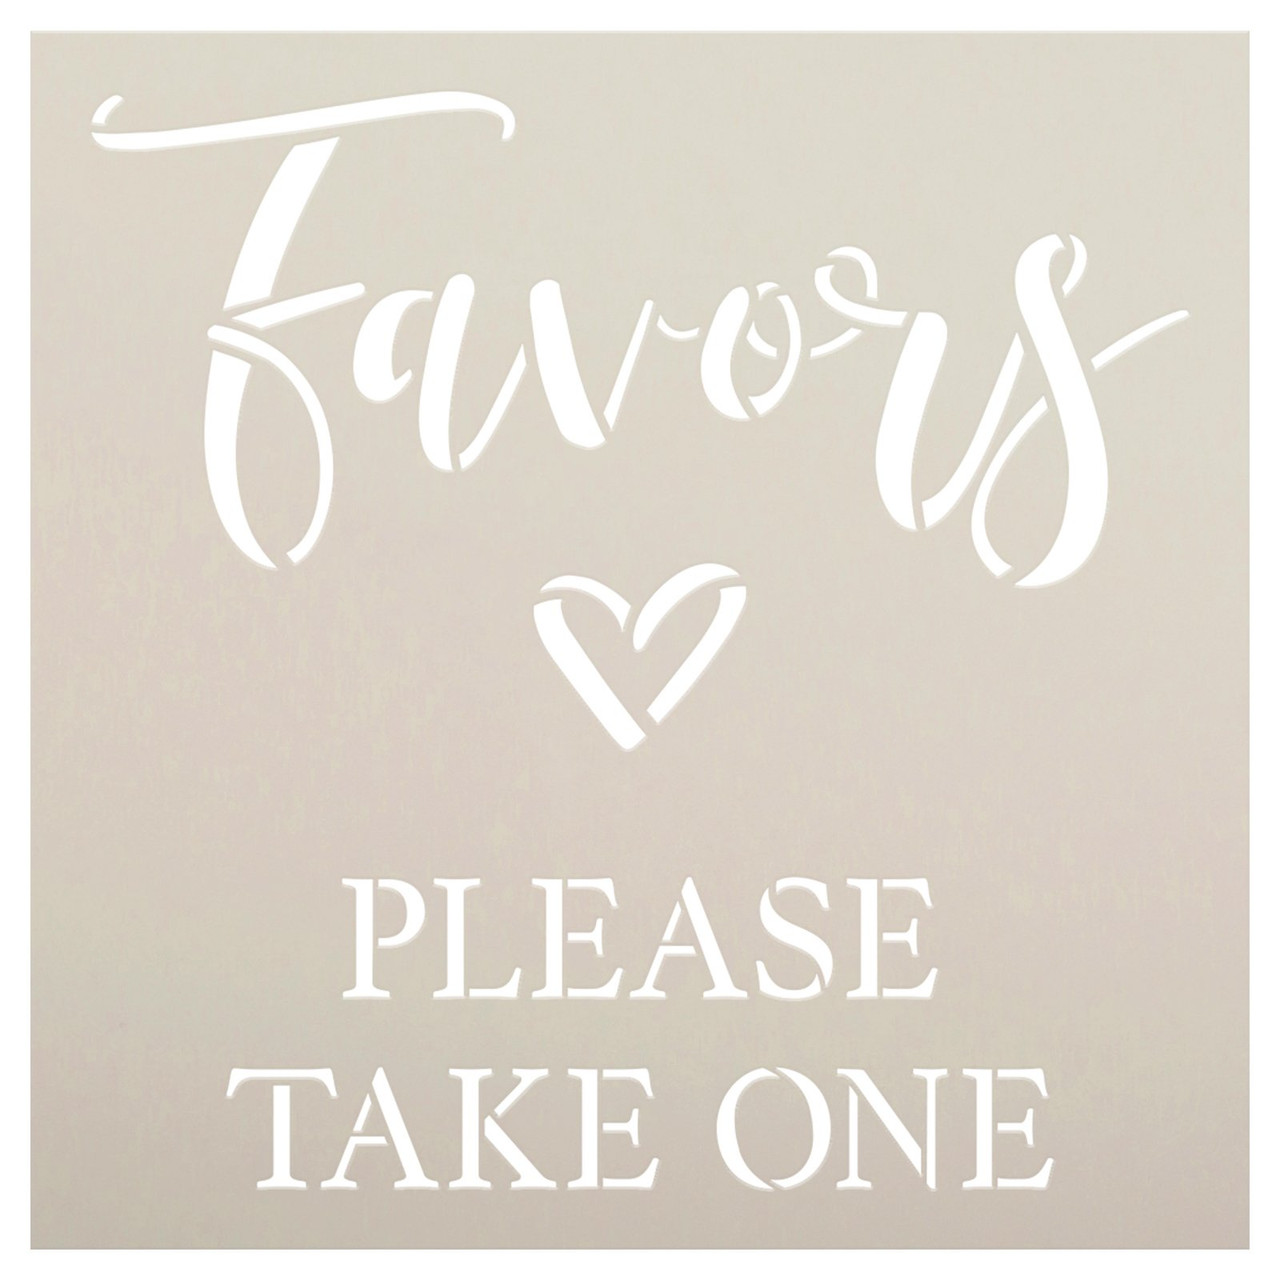 Favors Please Take One Stencil by StudioR12 | Craft DIY Wedding Decor | Paint Wood Sign | Reusable Mylar Template | Select Size